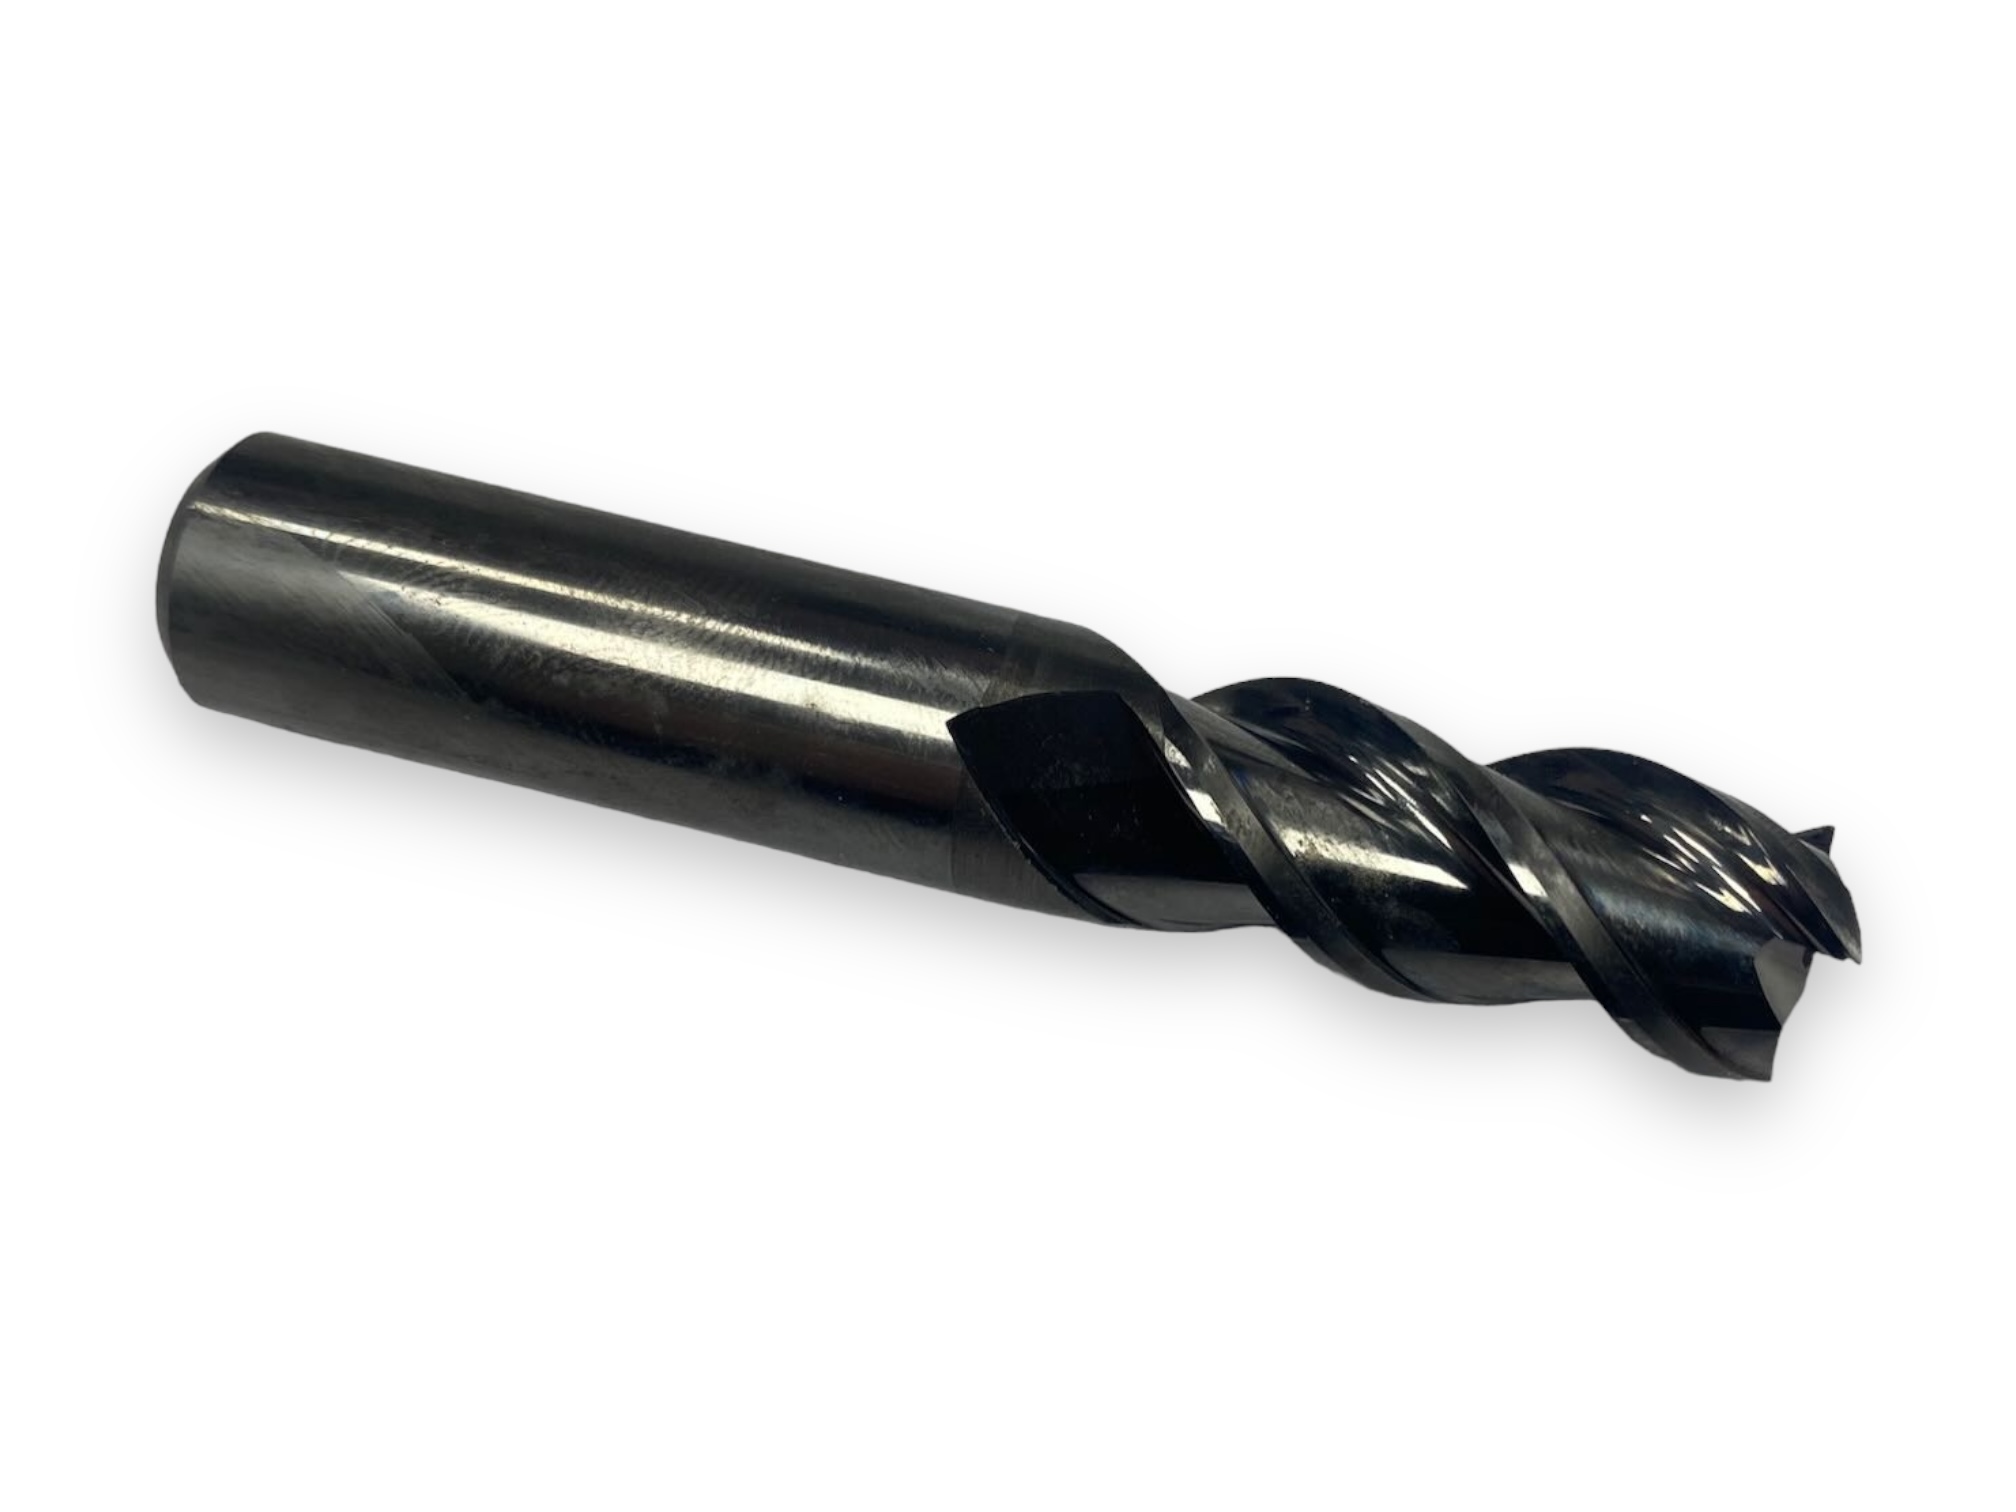 ALUPOWER 16.0 Quick Spiral For Aluminium End Mill Carbide